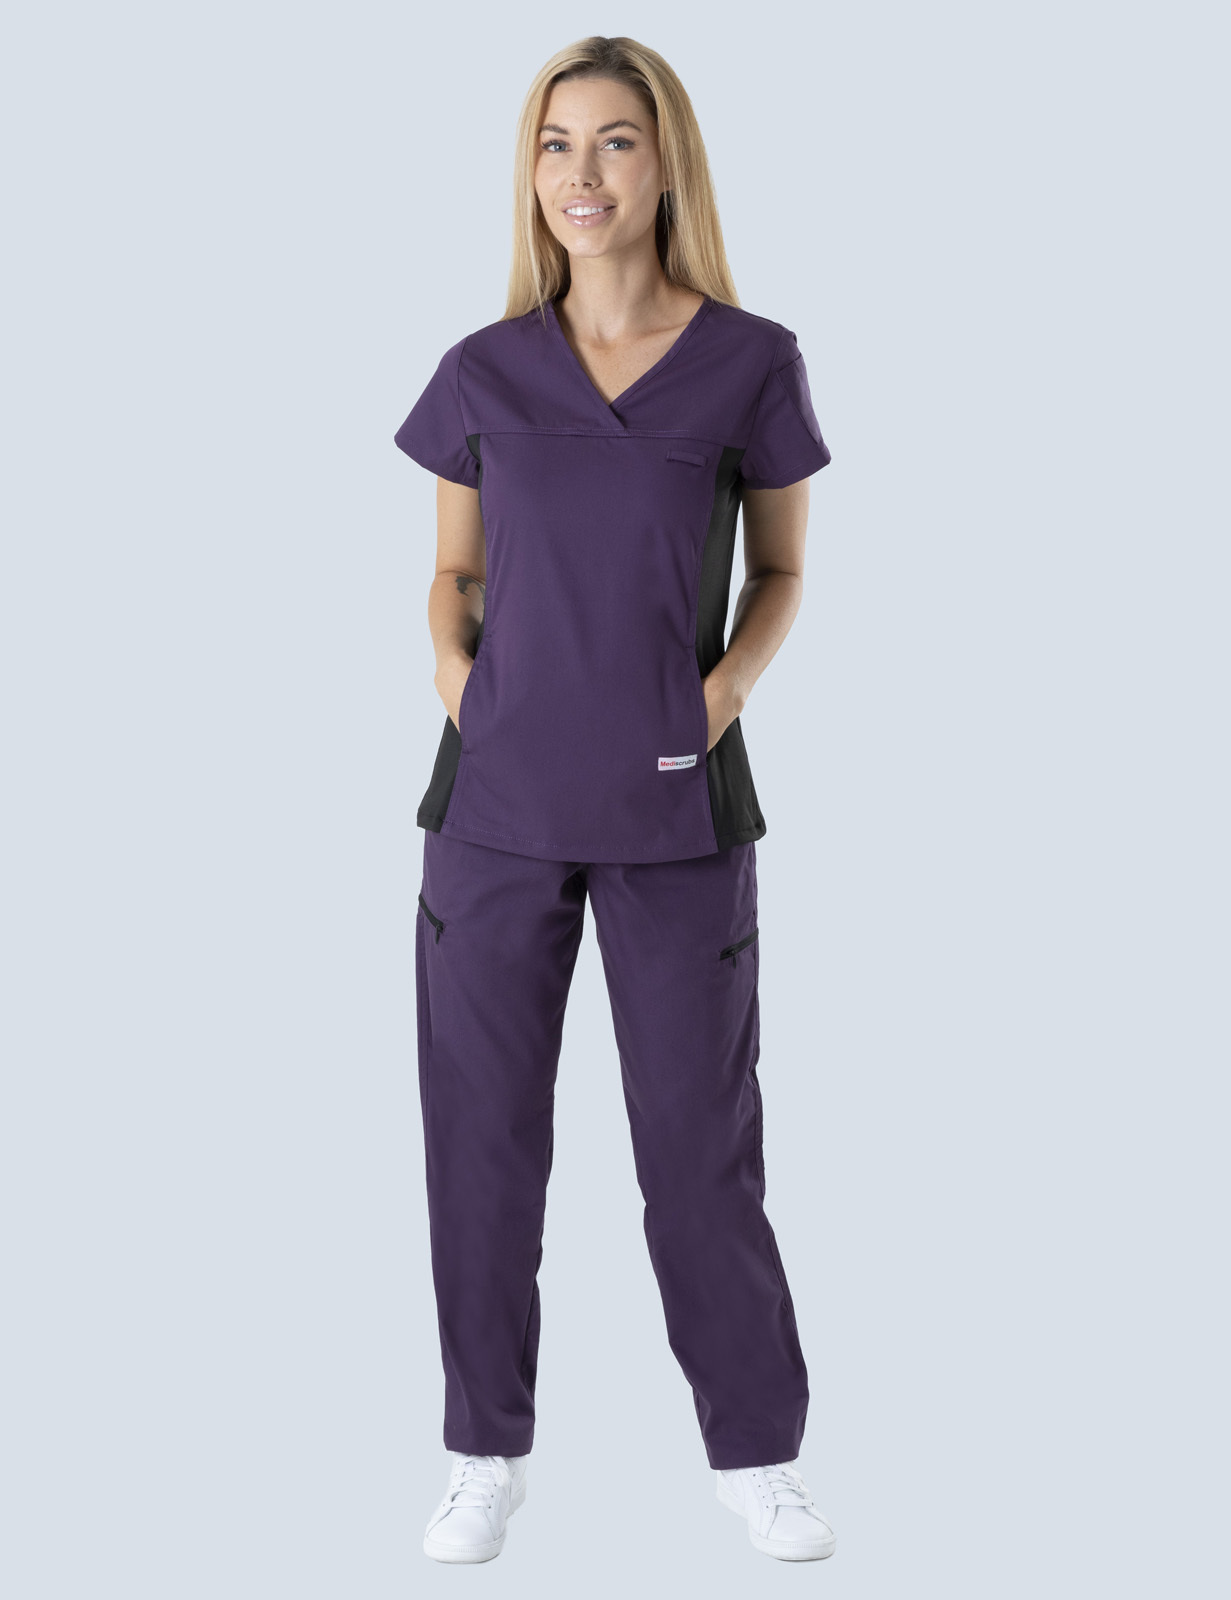 Redland Hospital Special Care Nursery Uniform Bundle (Women's Fit Spandex Top and Cargo Pants in Aubergine incl Logo's) 